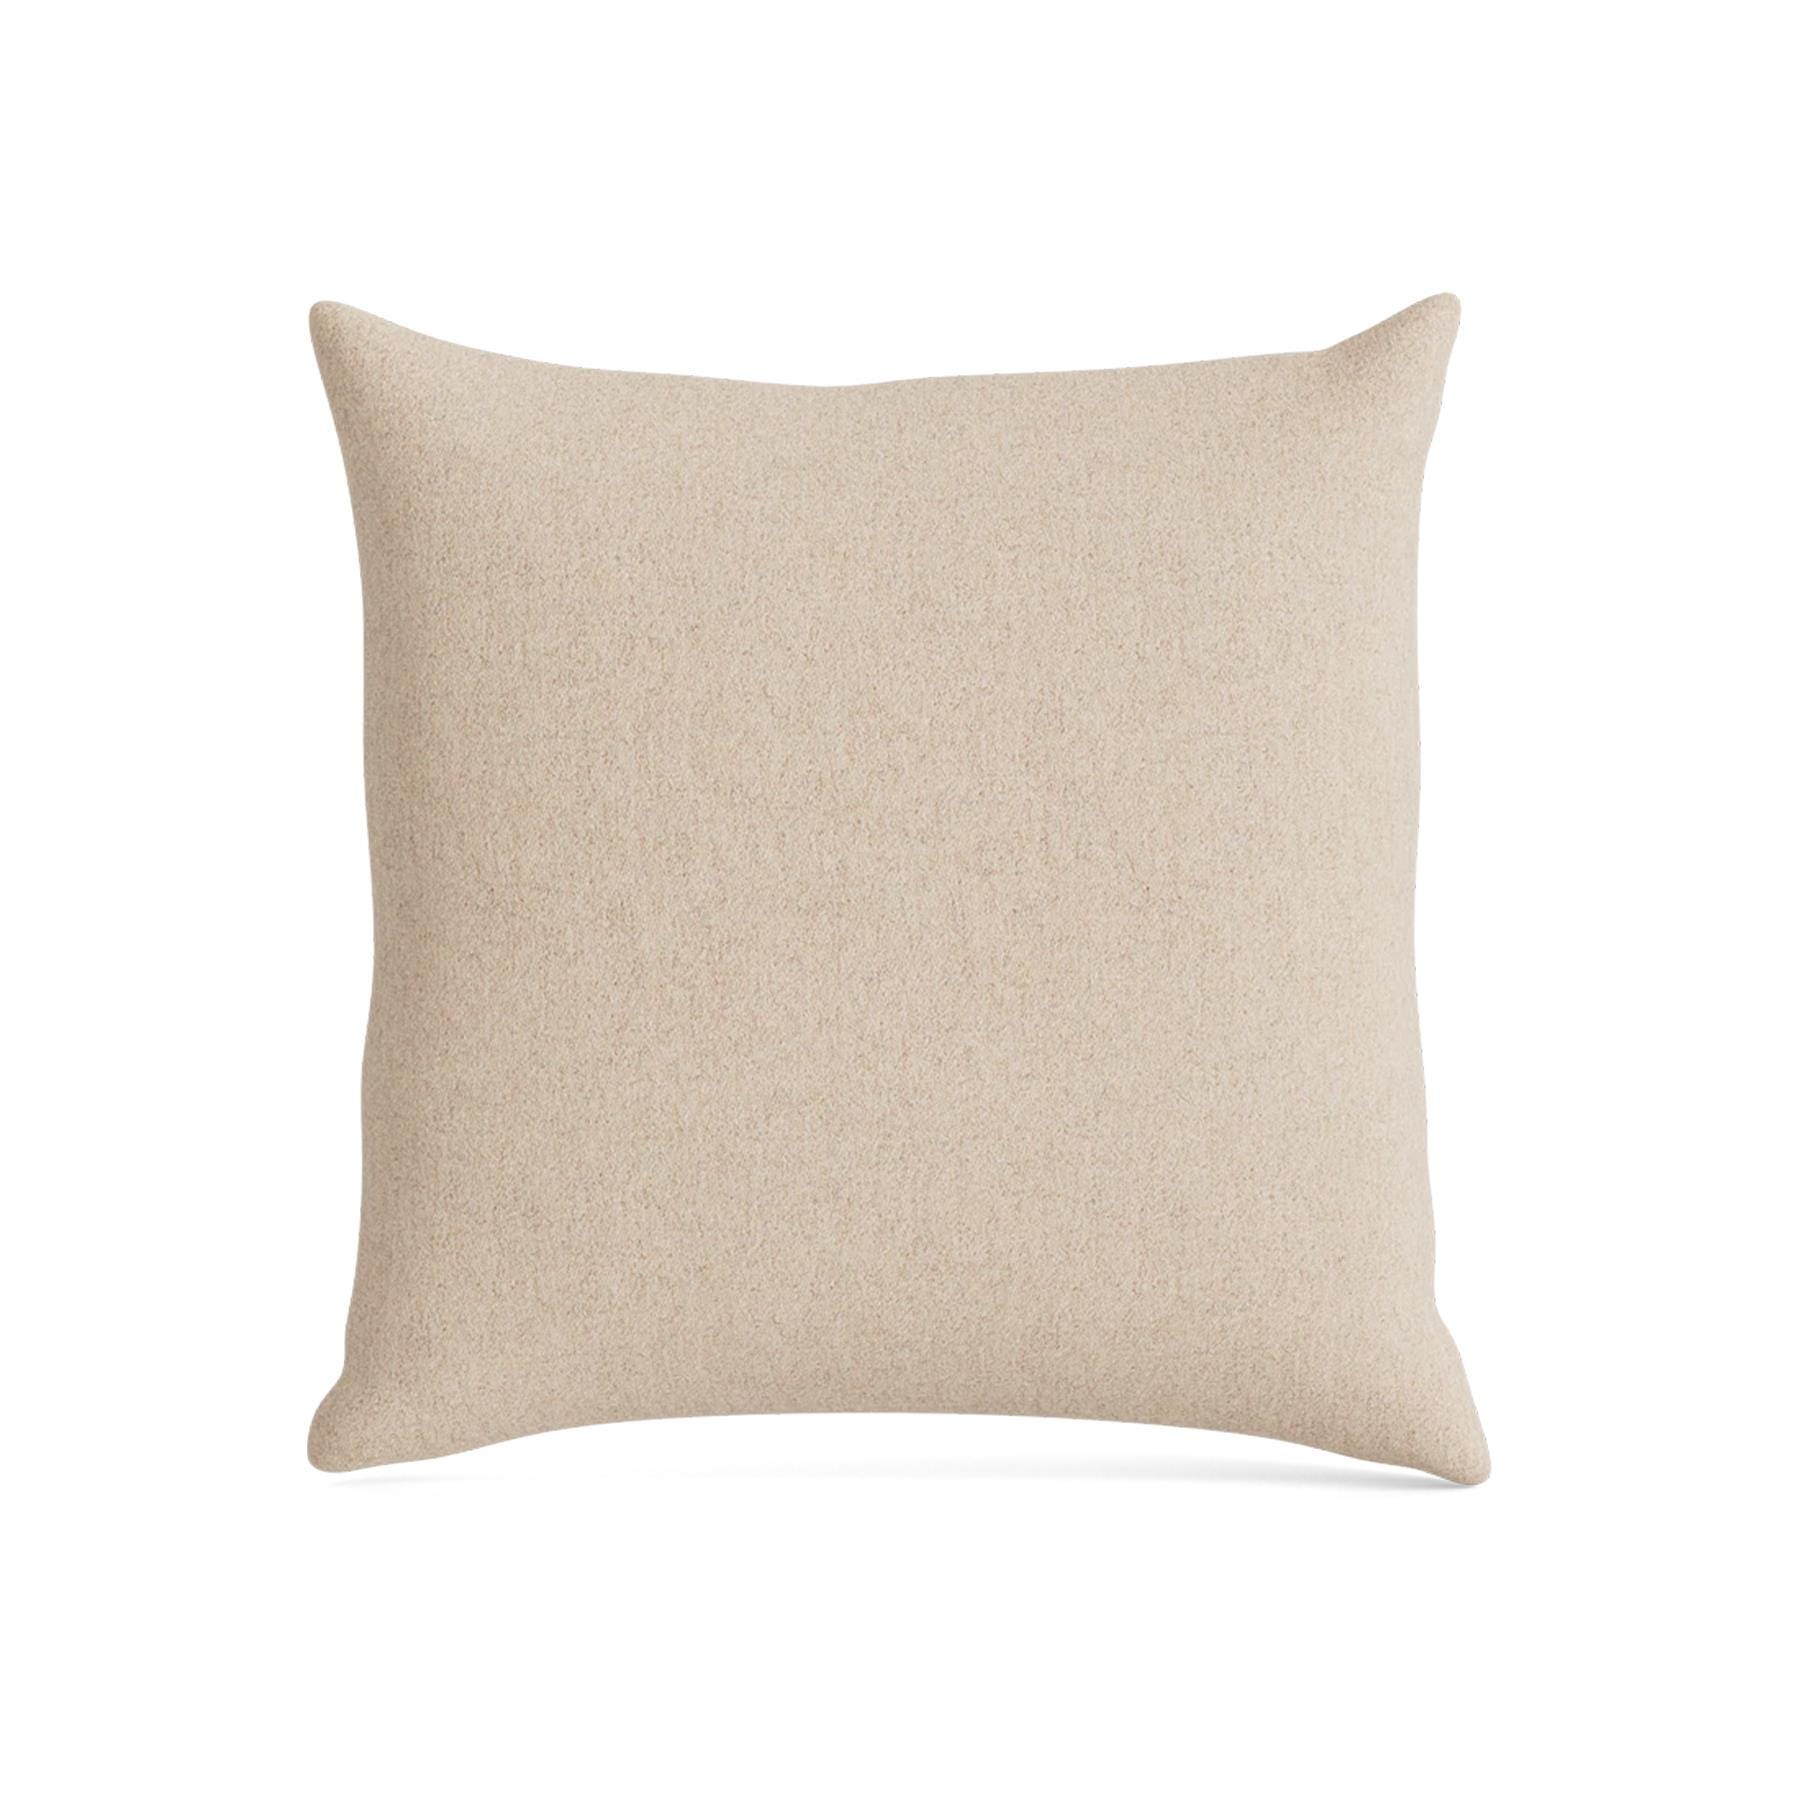 Make Nordic Pillow 50cmx50cm Wooly Sand 1037 Down And Fibers Cream